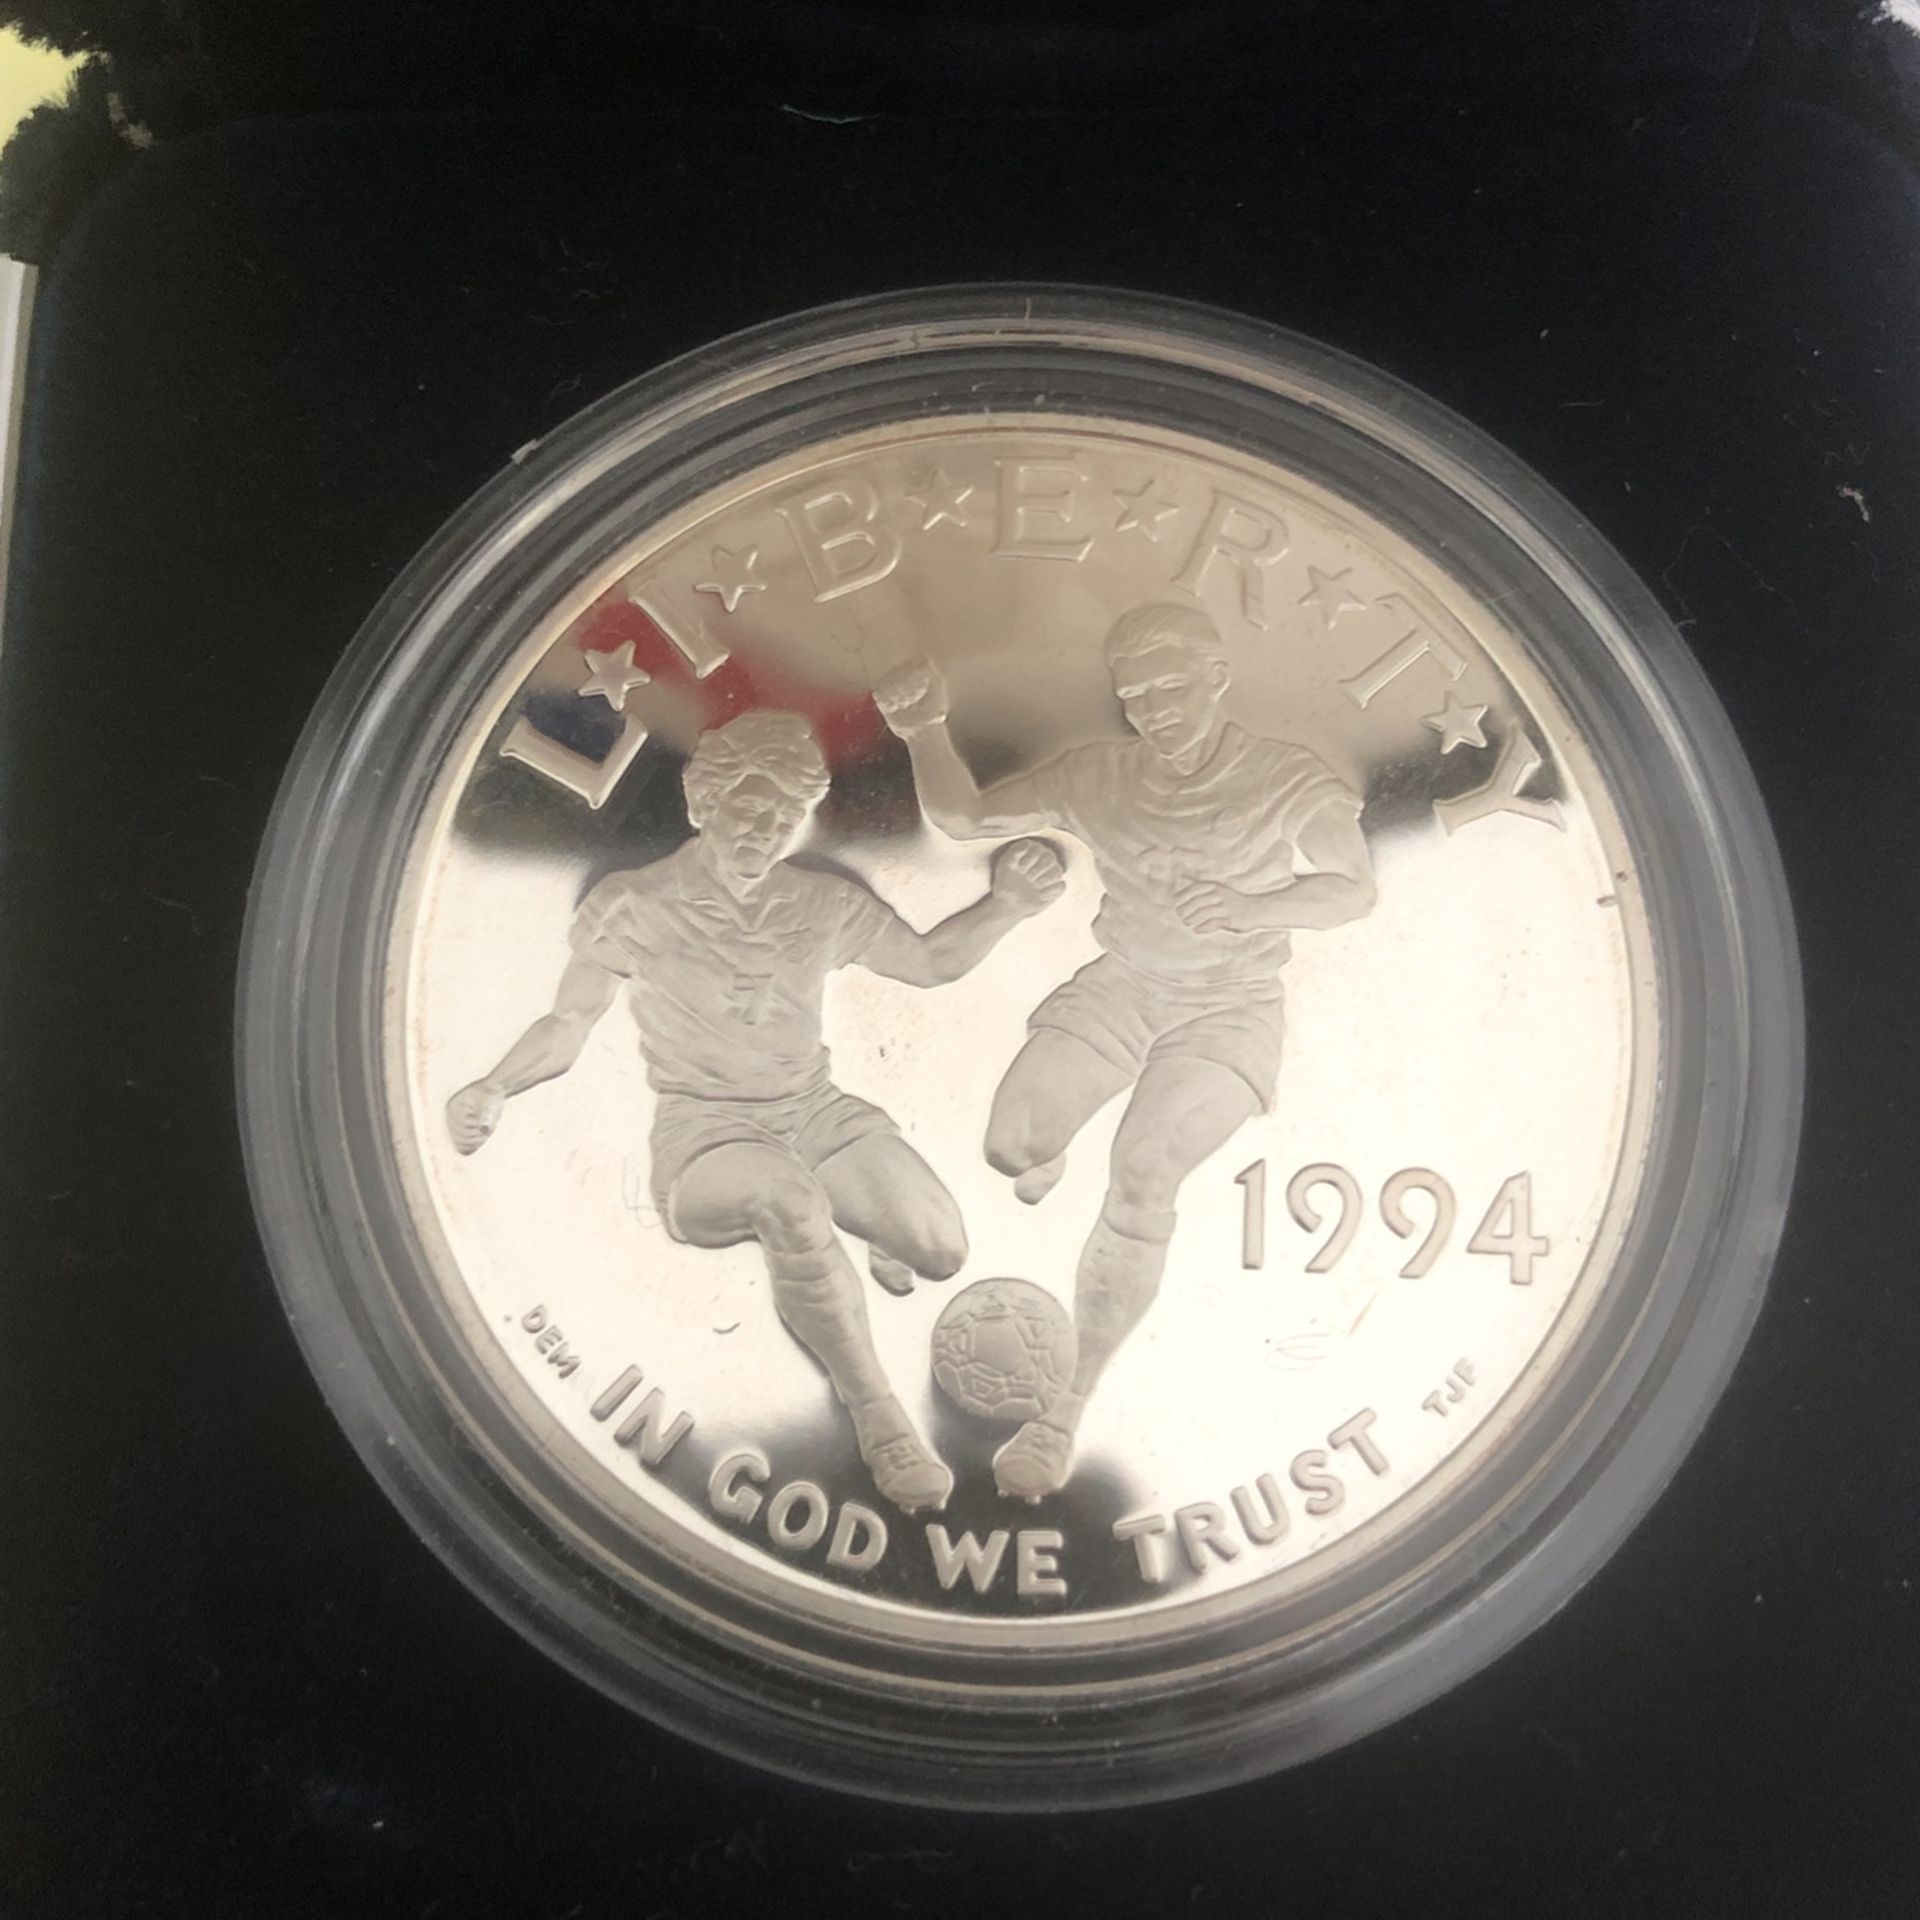 1994 World Cup Proof Silver Dollar